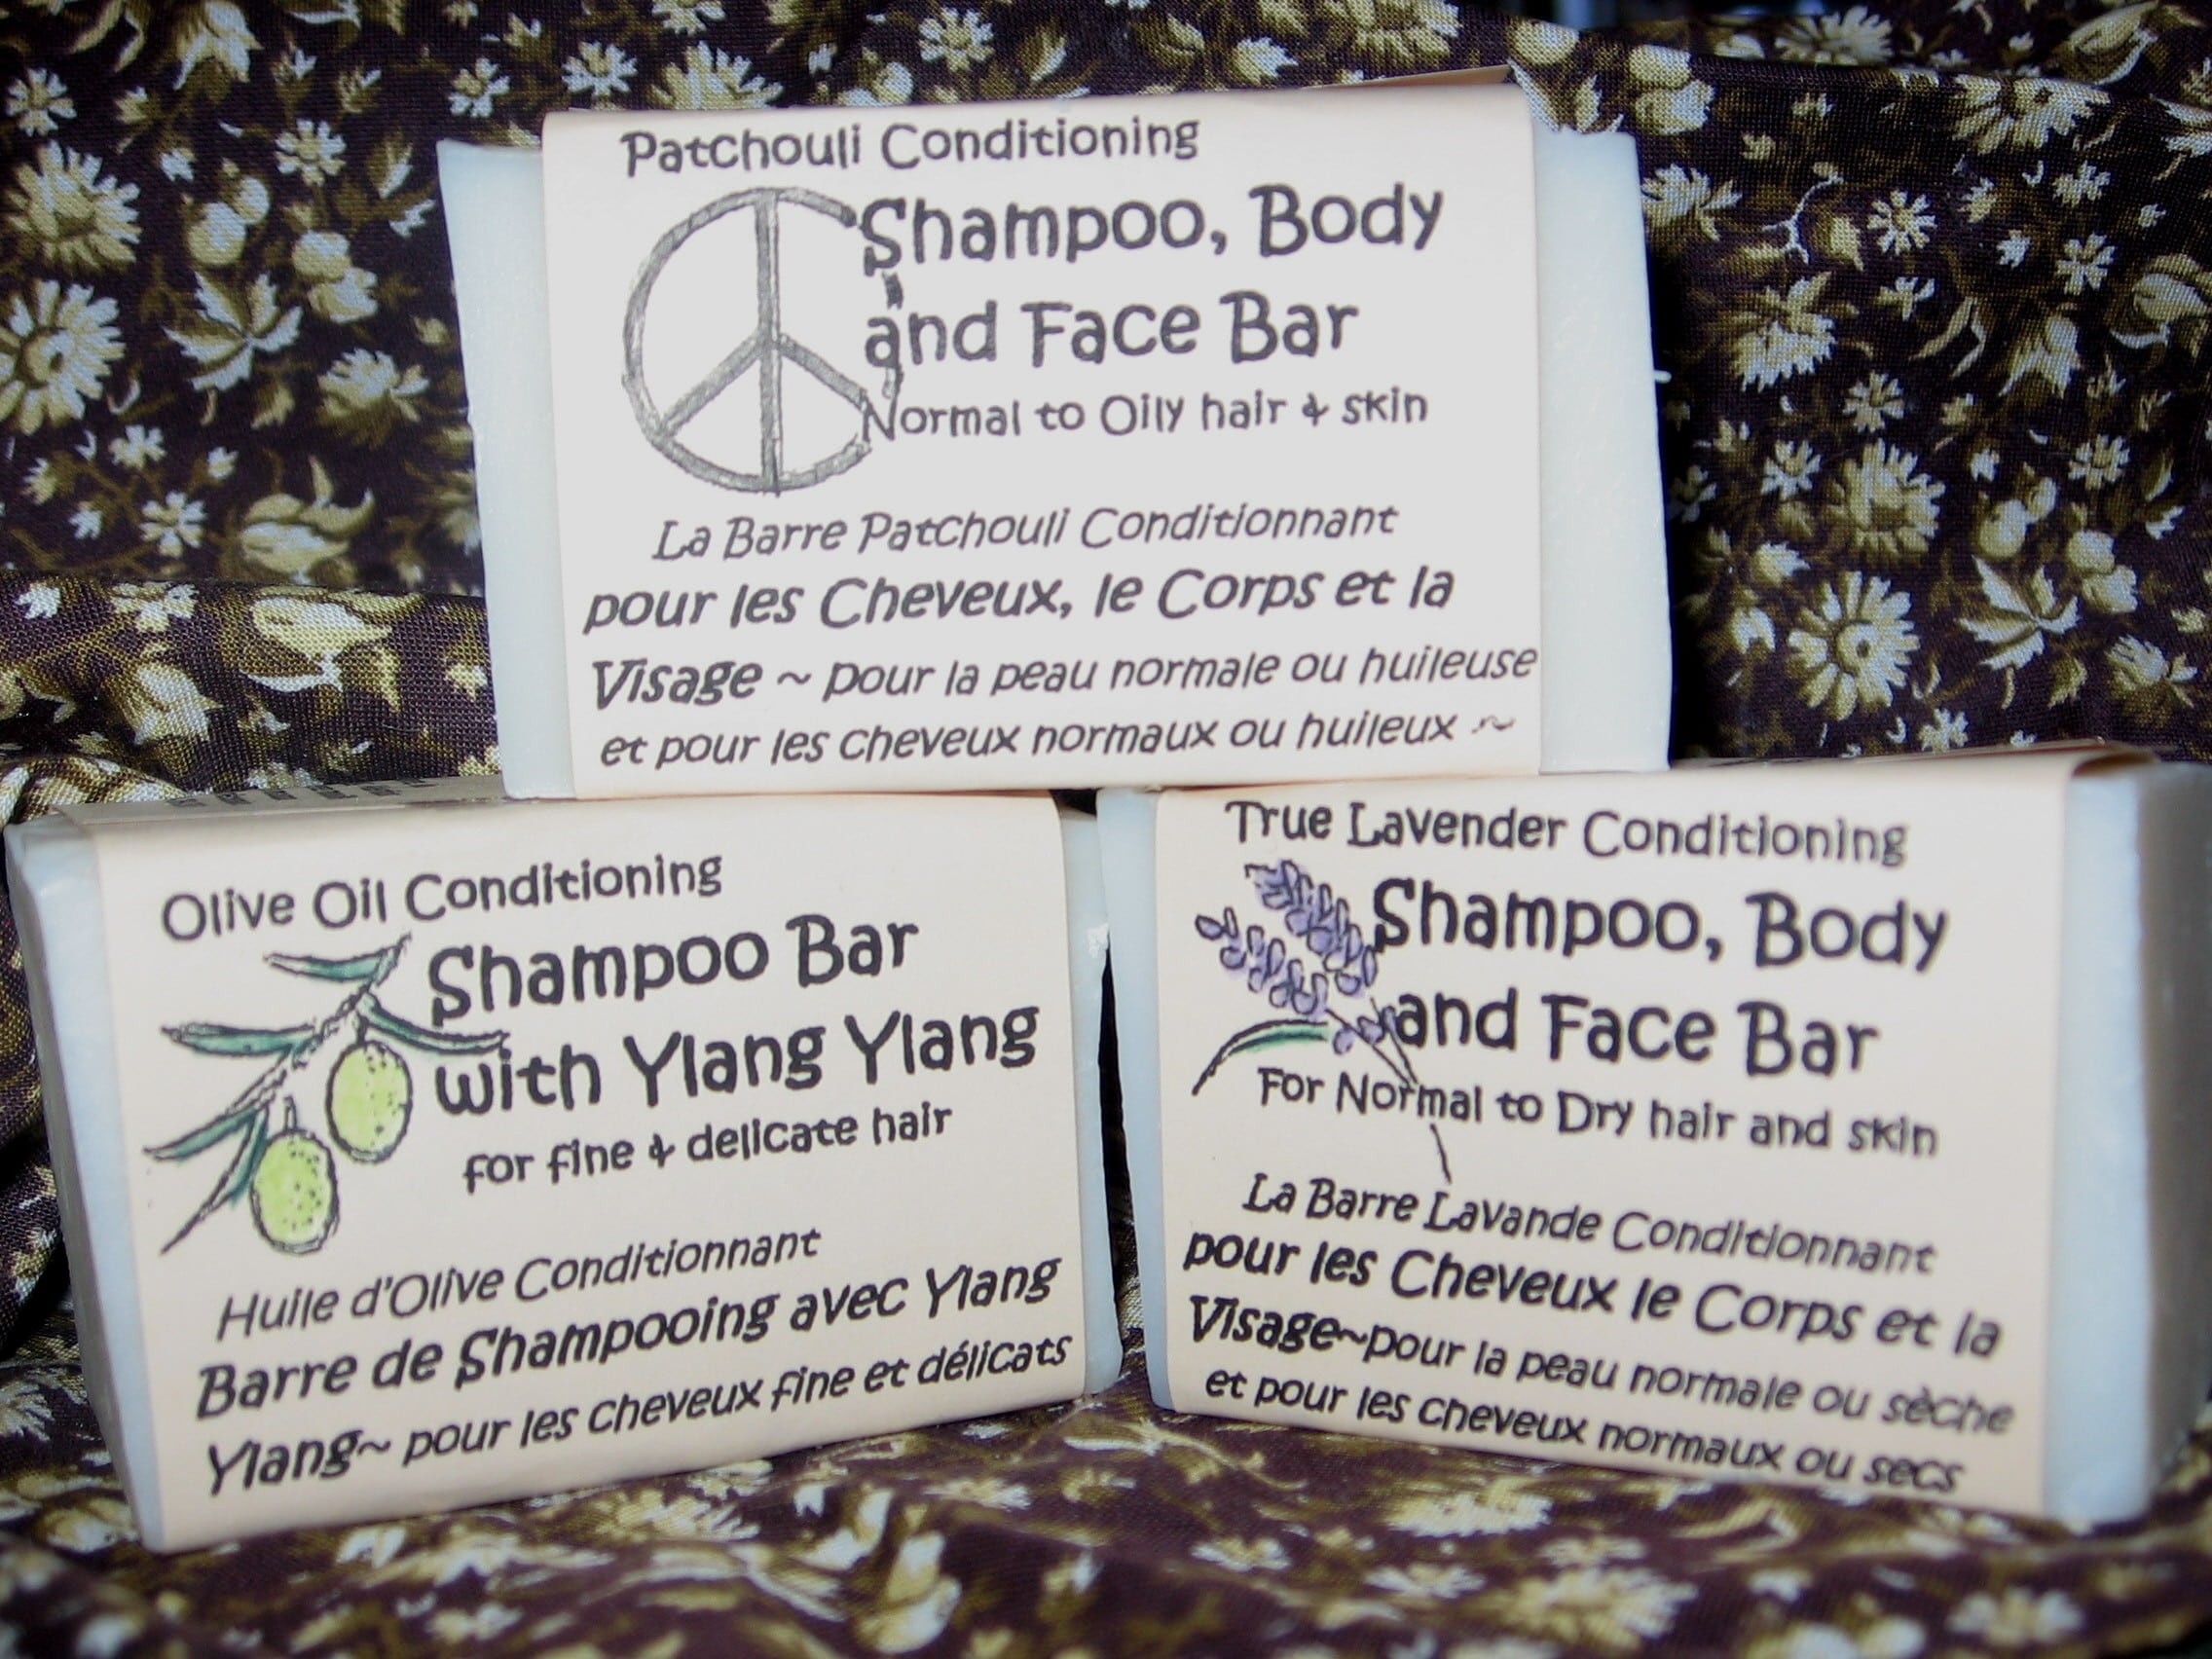 We use excellent quality wholesome ingredients in our products, premium food grade or certified organic when possible.  Shampoo bars made with care in Manitoba.